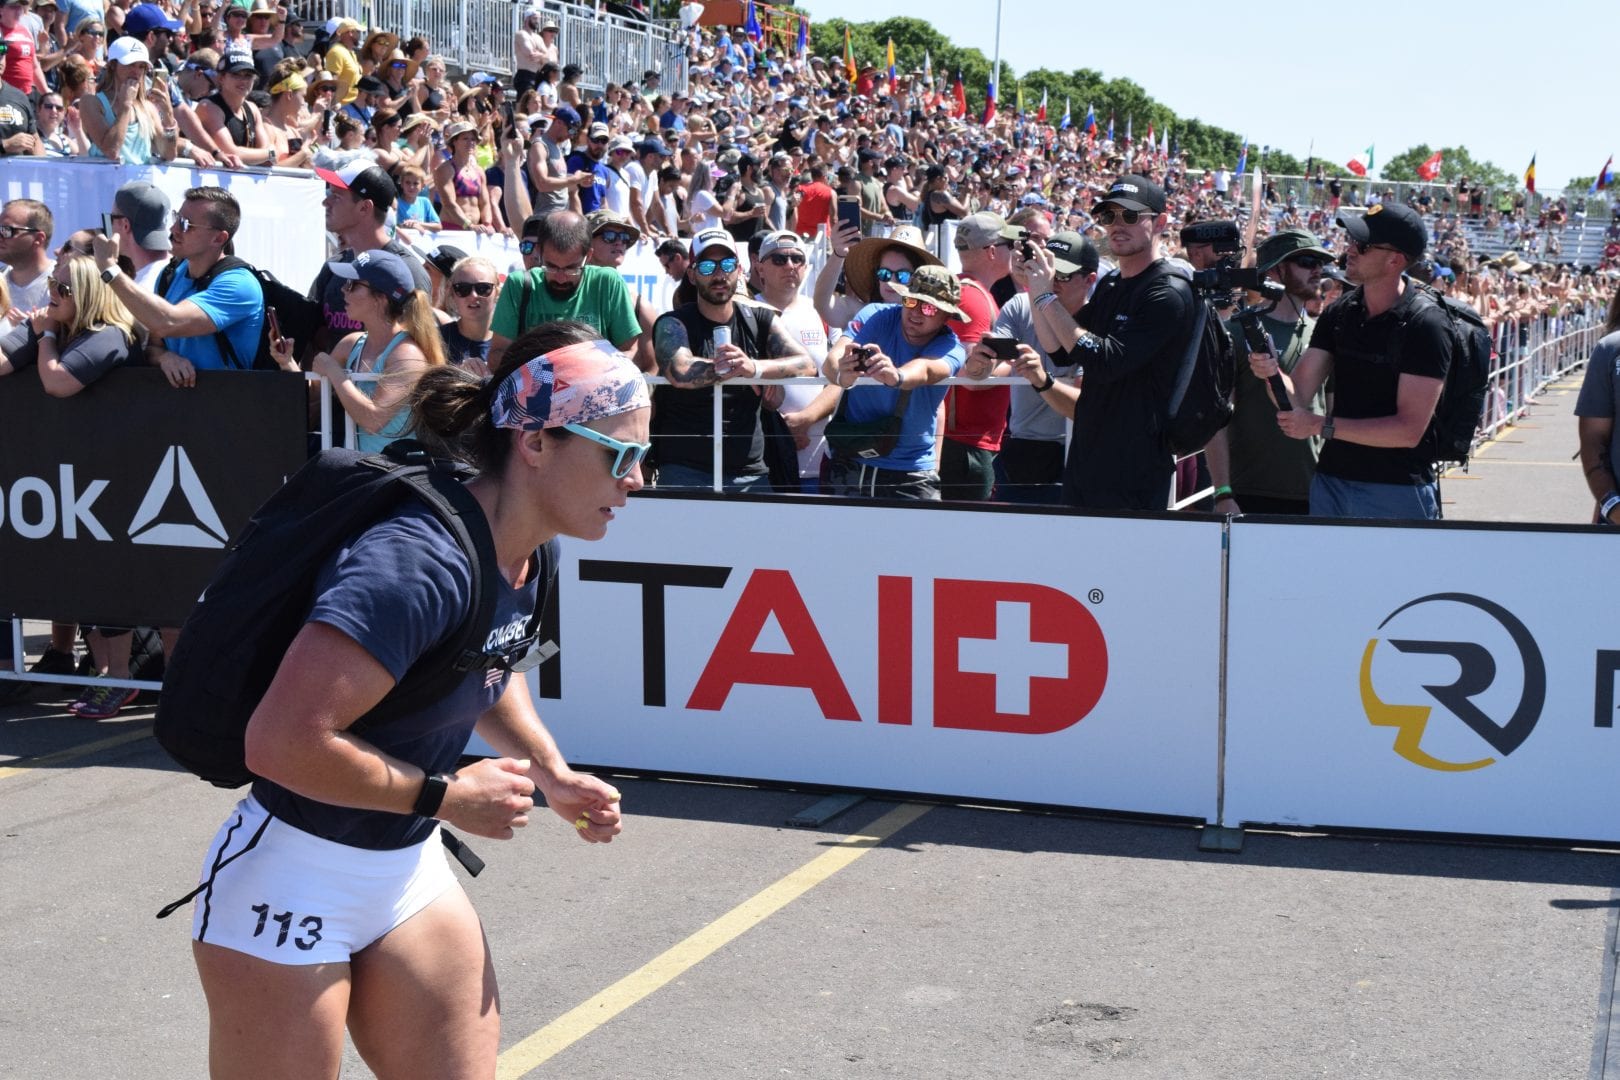 Katie Trombetta competes in the Ruck Run event at the 2019 CrossFit Games